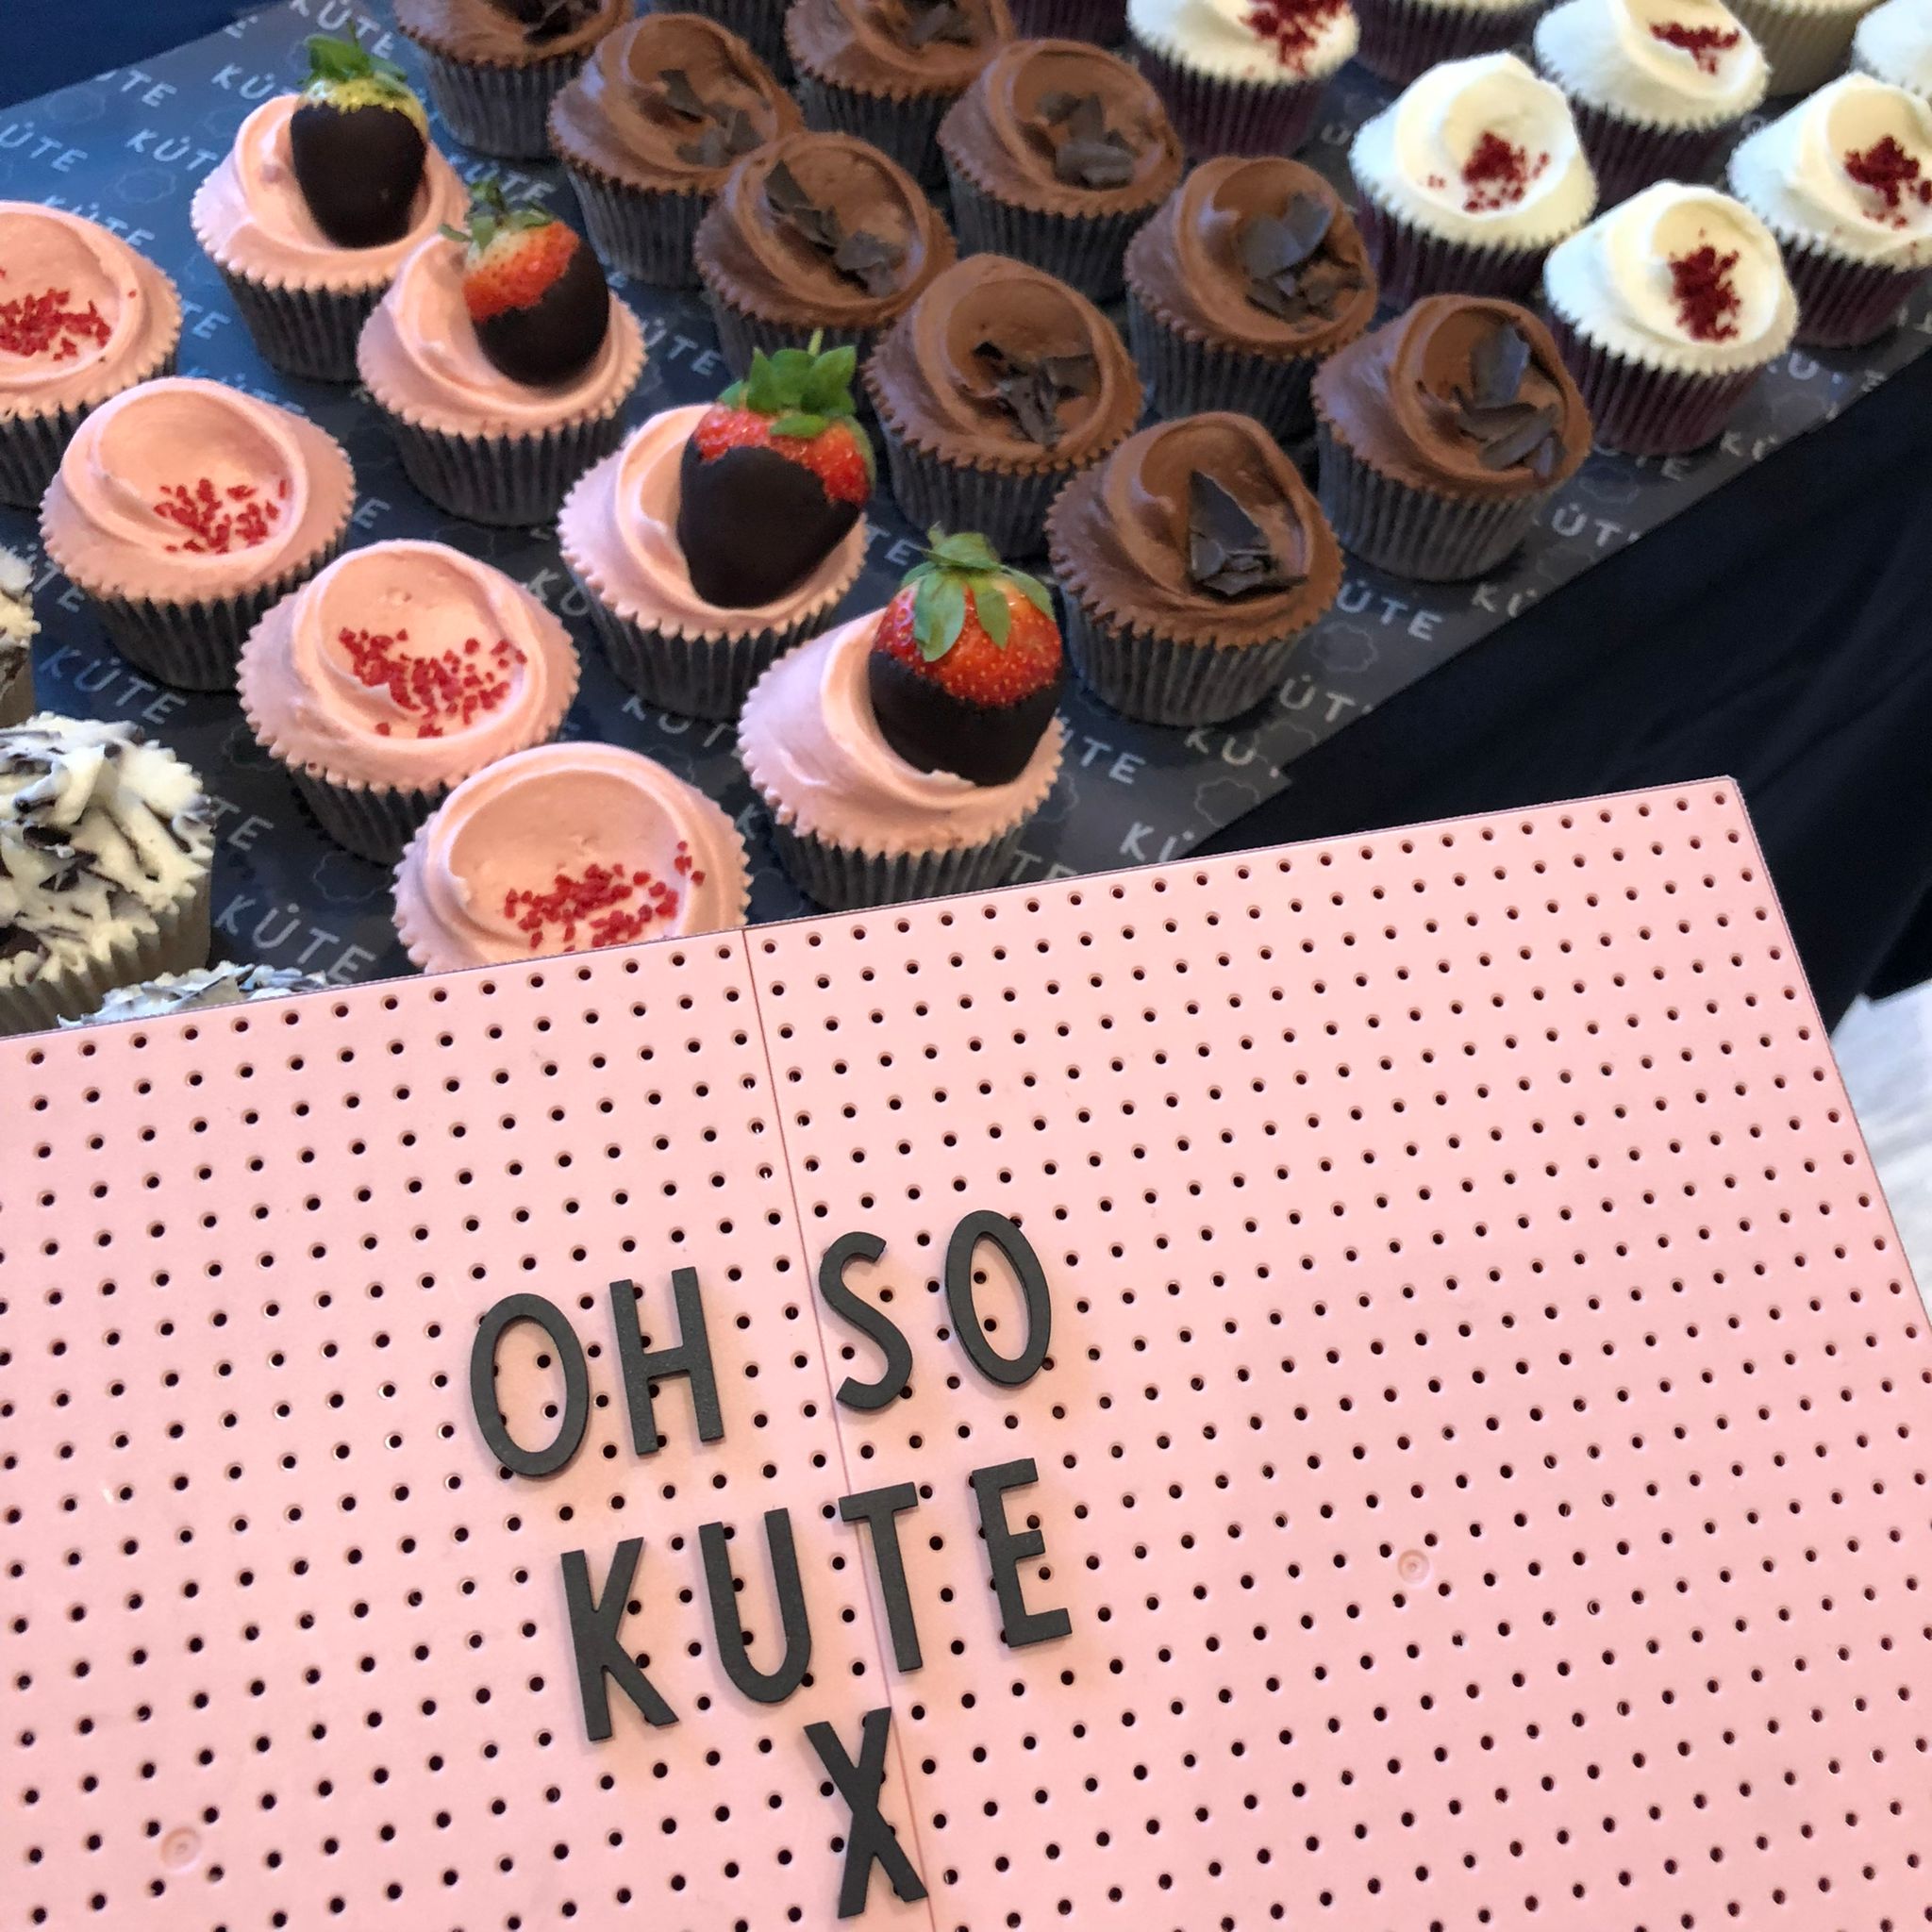 Indulge in Sweetness with Kute Cake's Dessert Table!